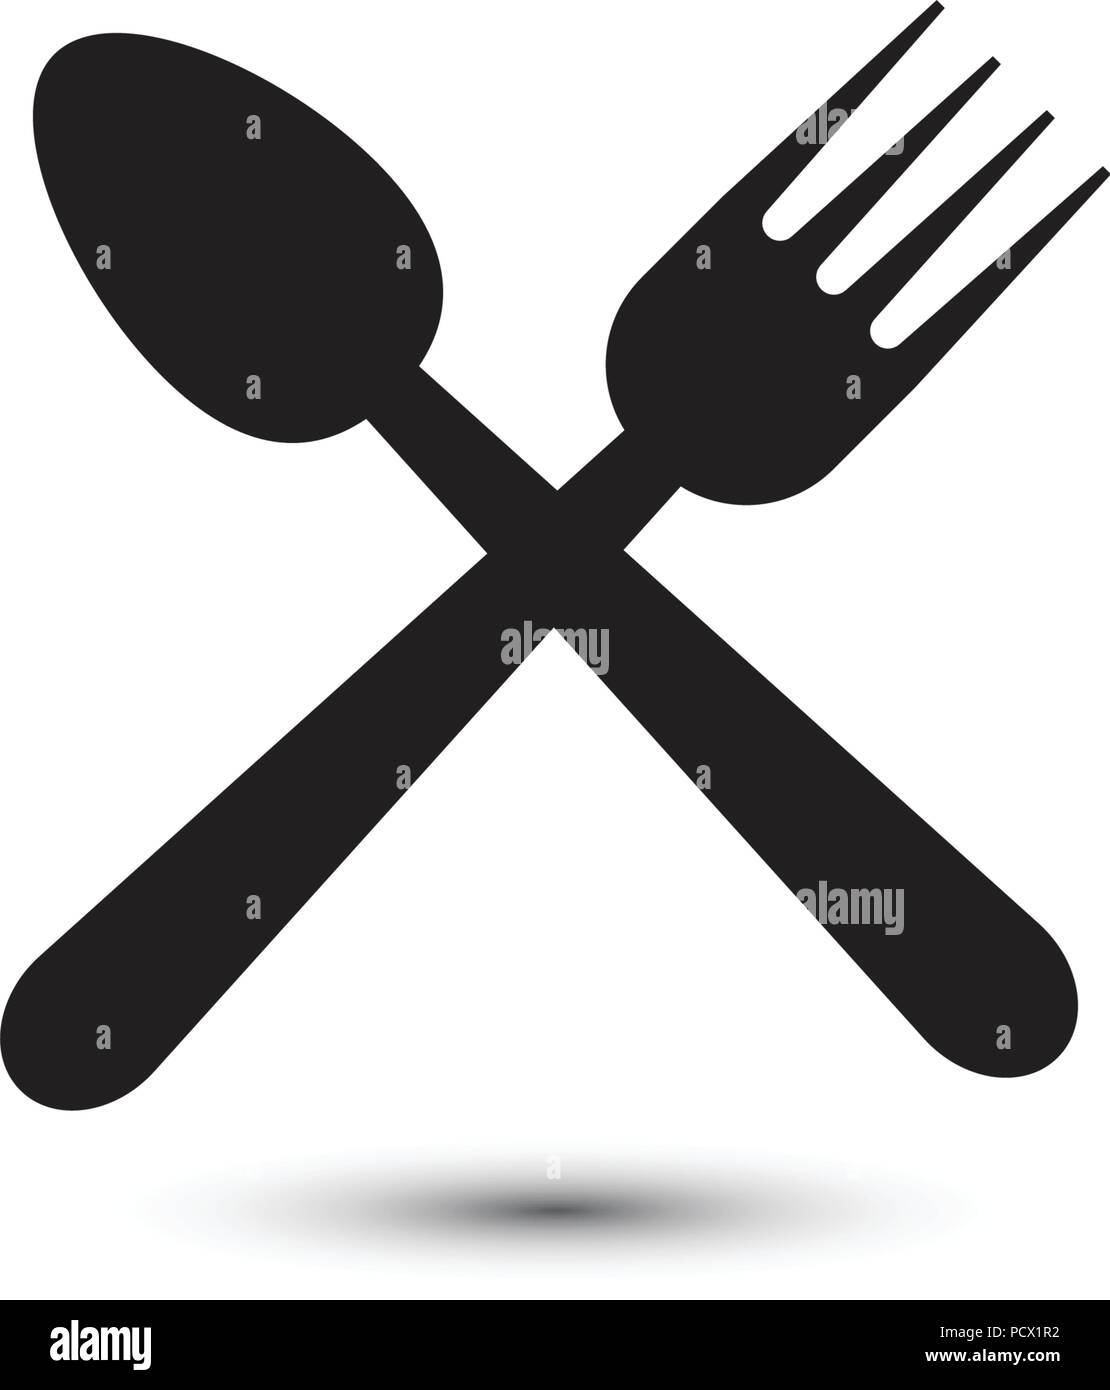 Illustration of spoon and fork graphic design template vector Stock Vector